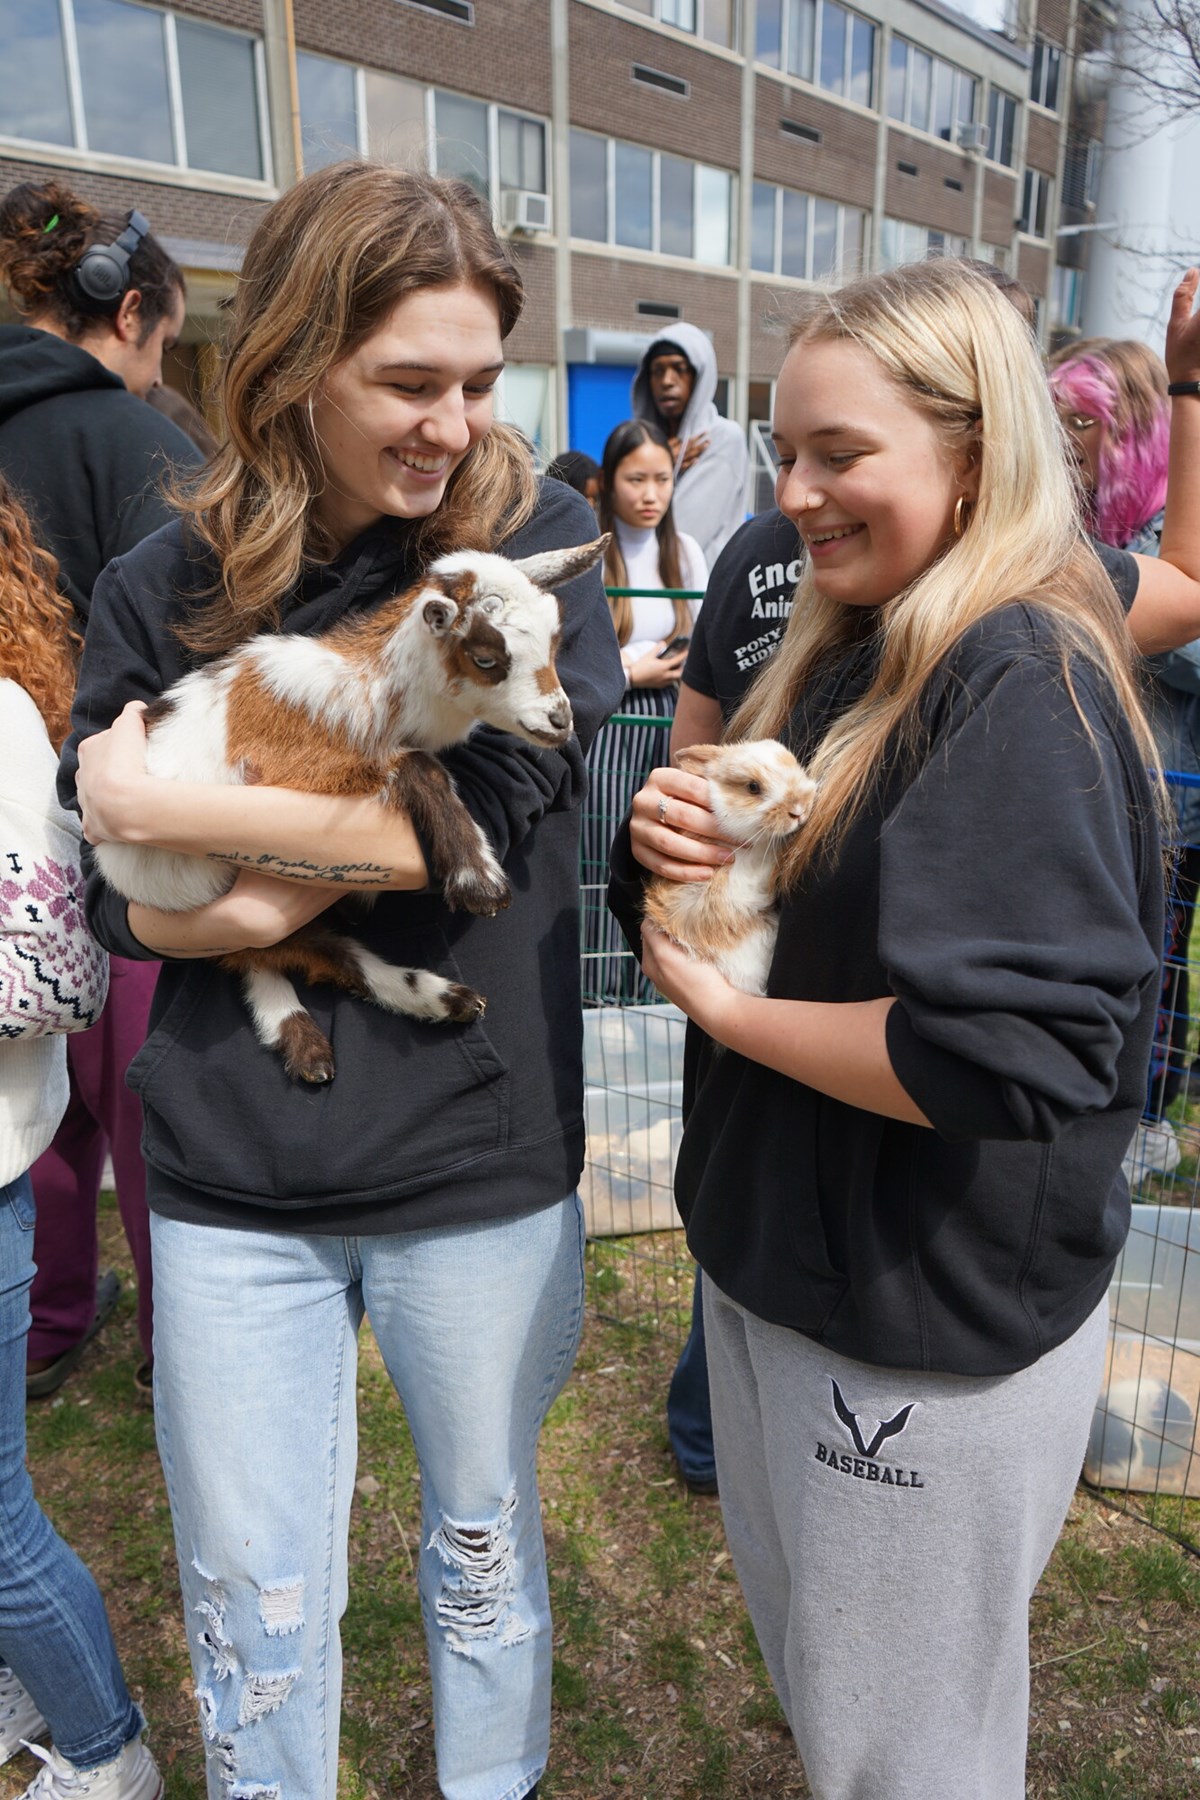 Two UMass Lowell students hold baby goats at petting zoo